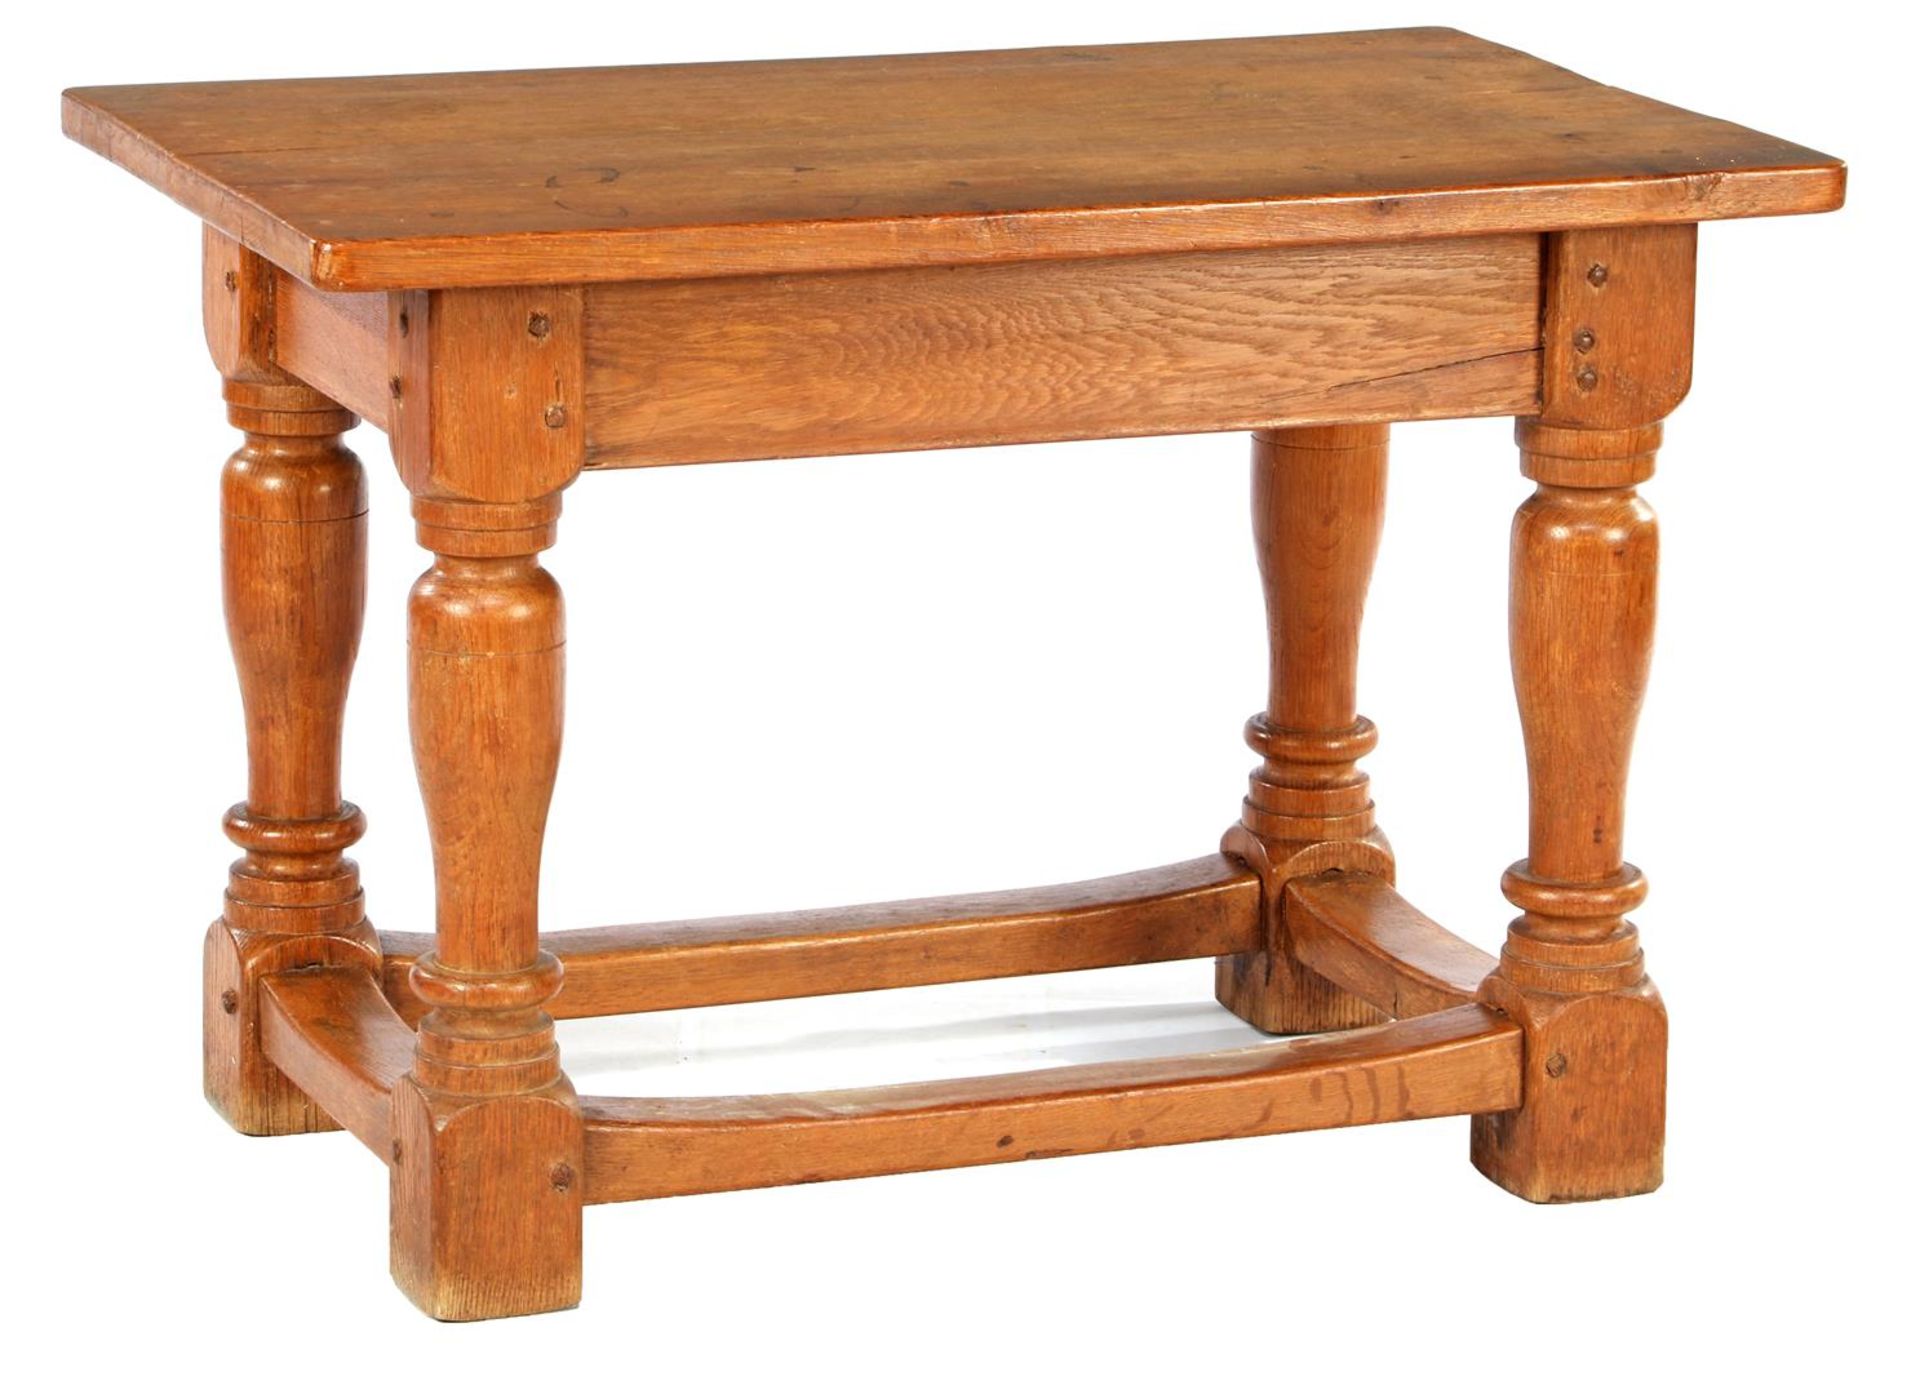 Solid oak table on bottle legs and control connection